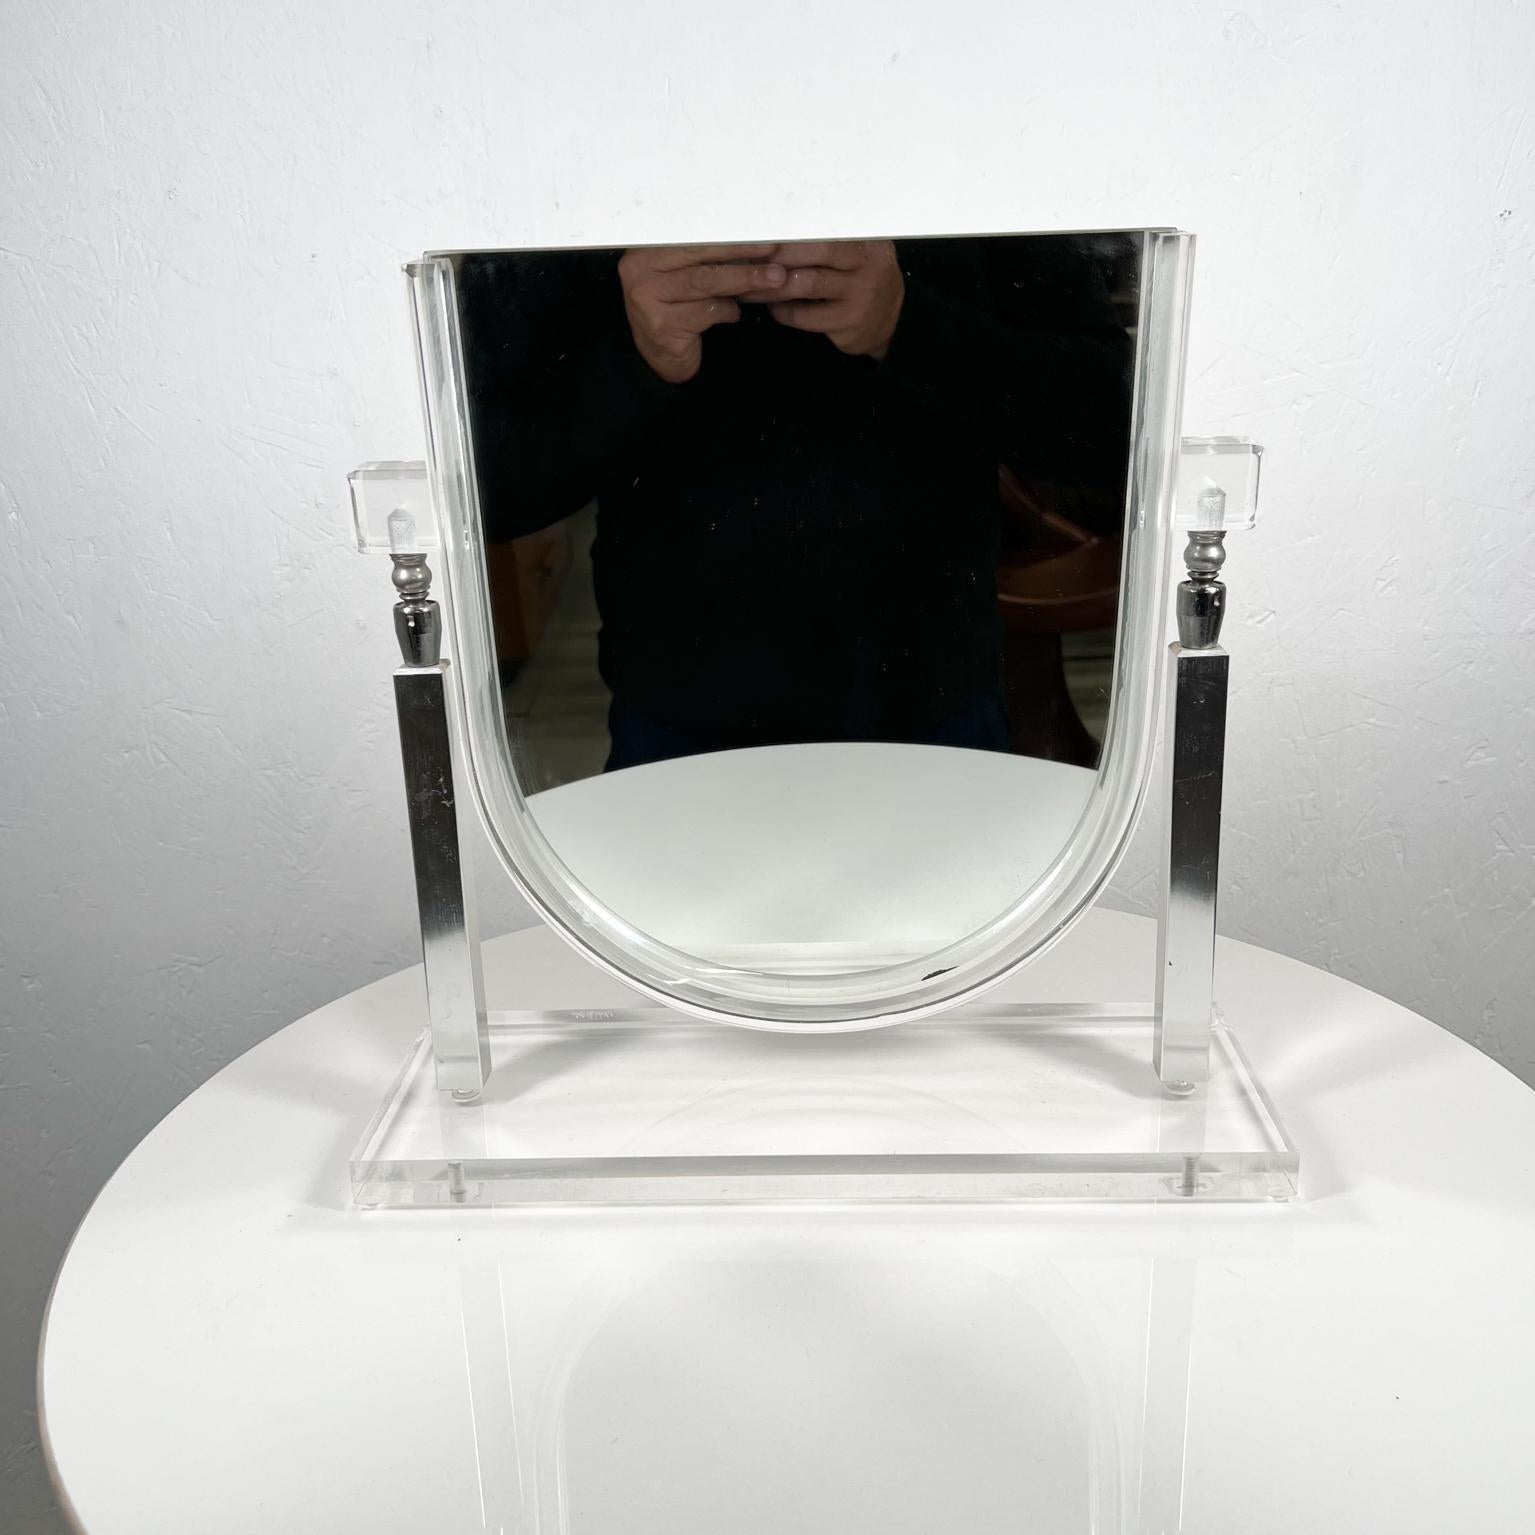 1970s Modernist Lucite Chrome vanity table mirror
in the style of Charles Hollis Jones.
Measures: 13.88 tall x 14.13 wide x 5 deep.
Preowned original vintage condition.
See images provided please.
 